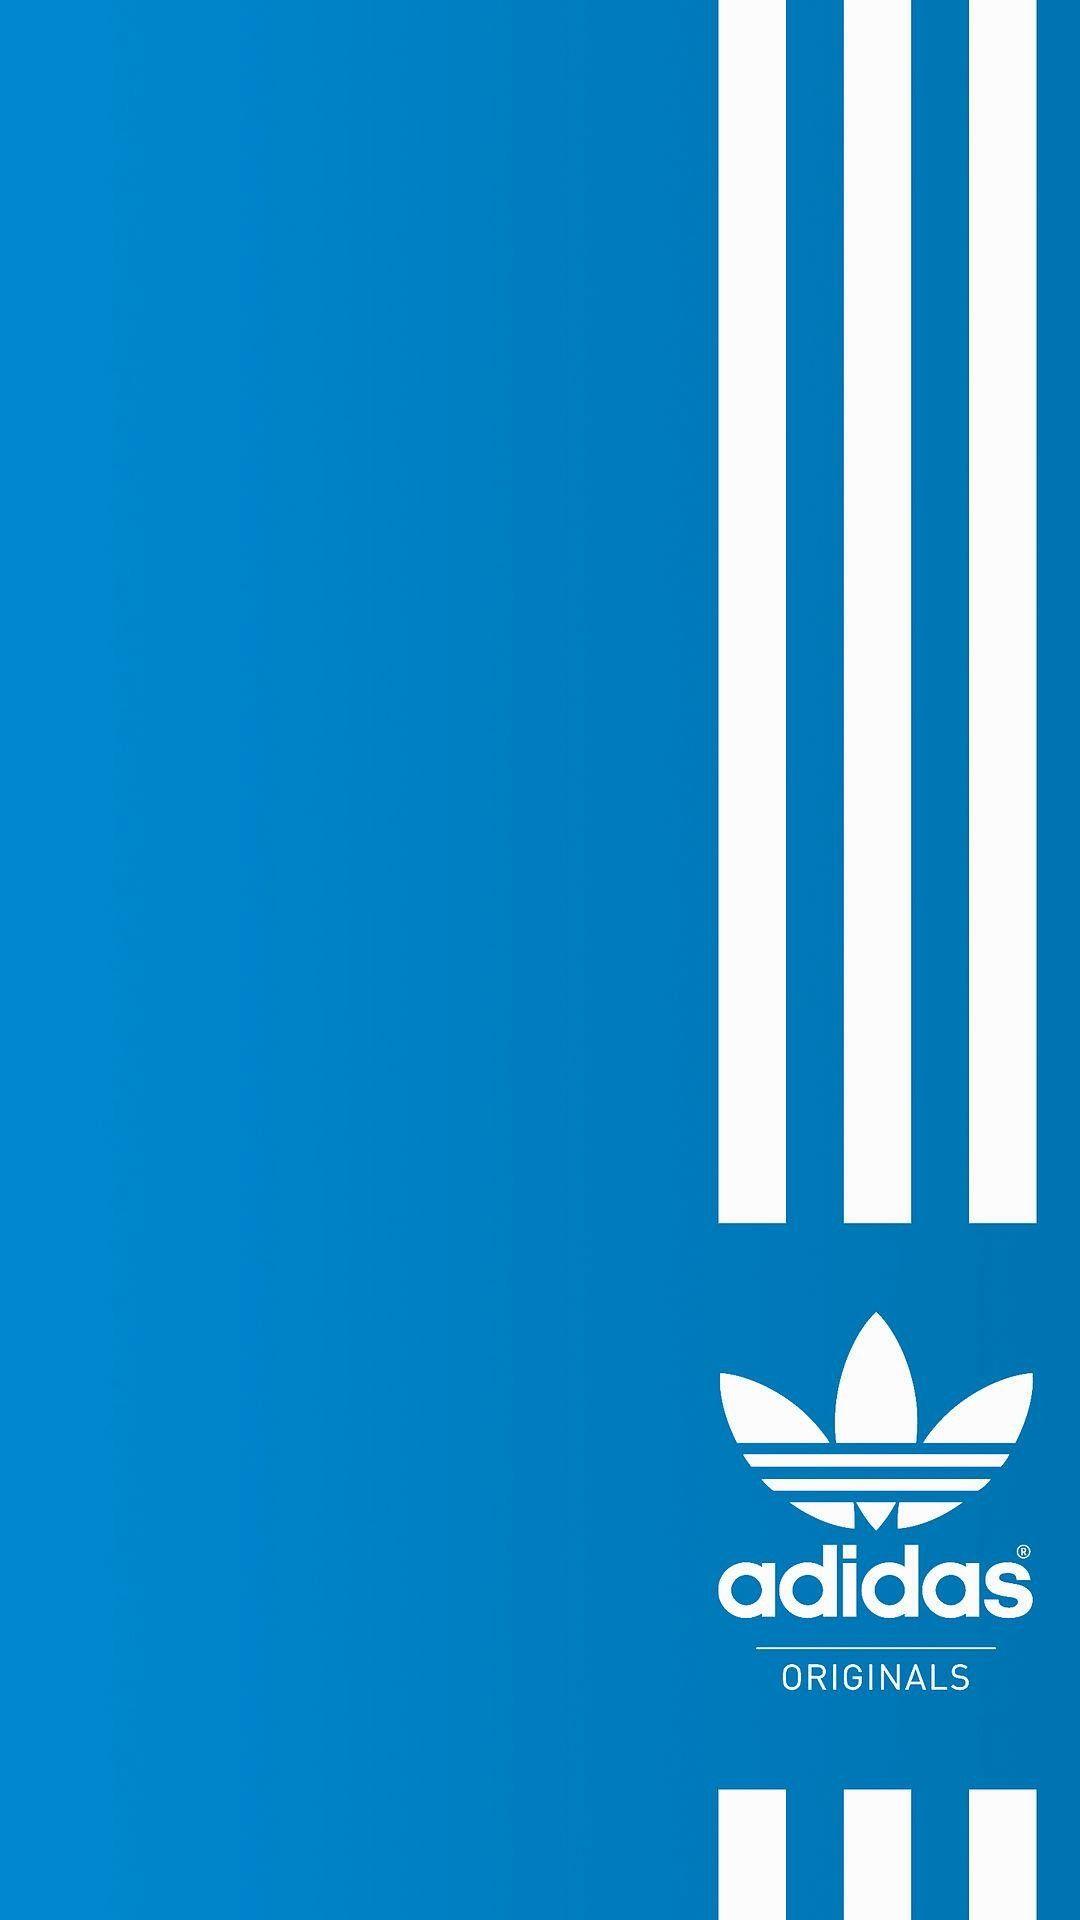 Adidas Iphone Wallpapers Top Free Adidas Iphone Backgrounds